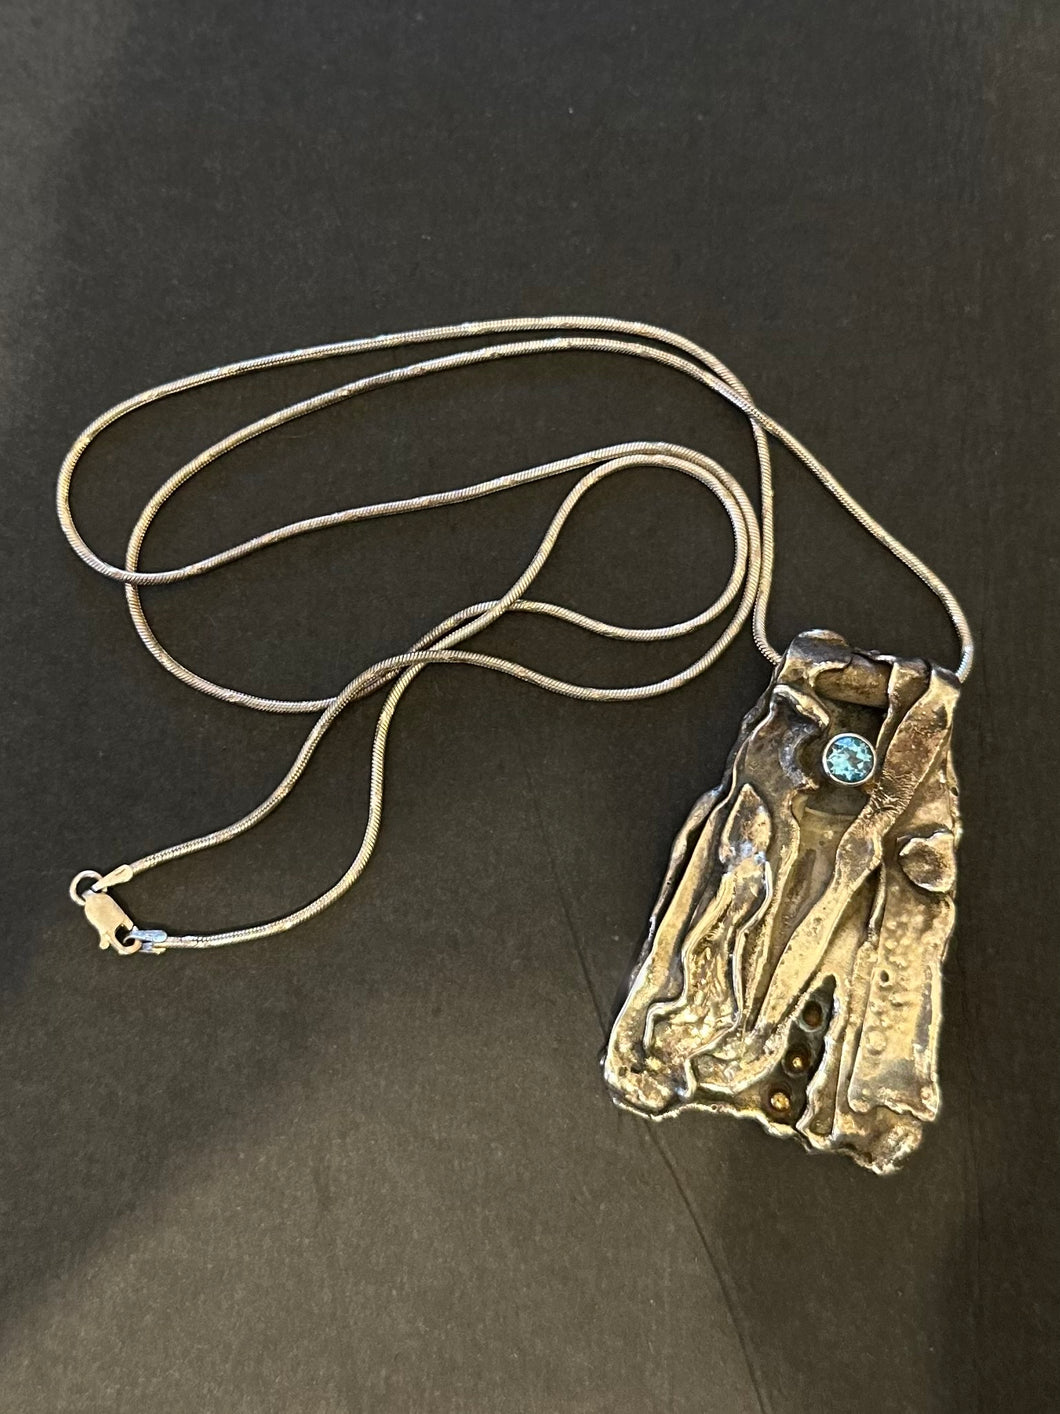 Vintage Unsigned Brutalist Abstract Reticulated Sterling Silver & Faceted Aquamarine Dragonfly Wing Pendant Necklace 30”